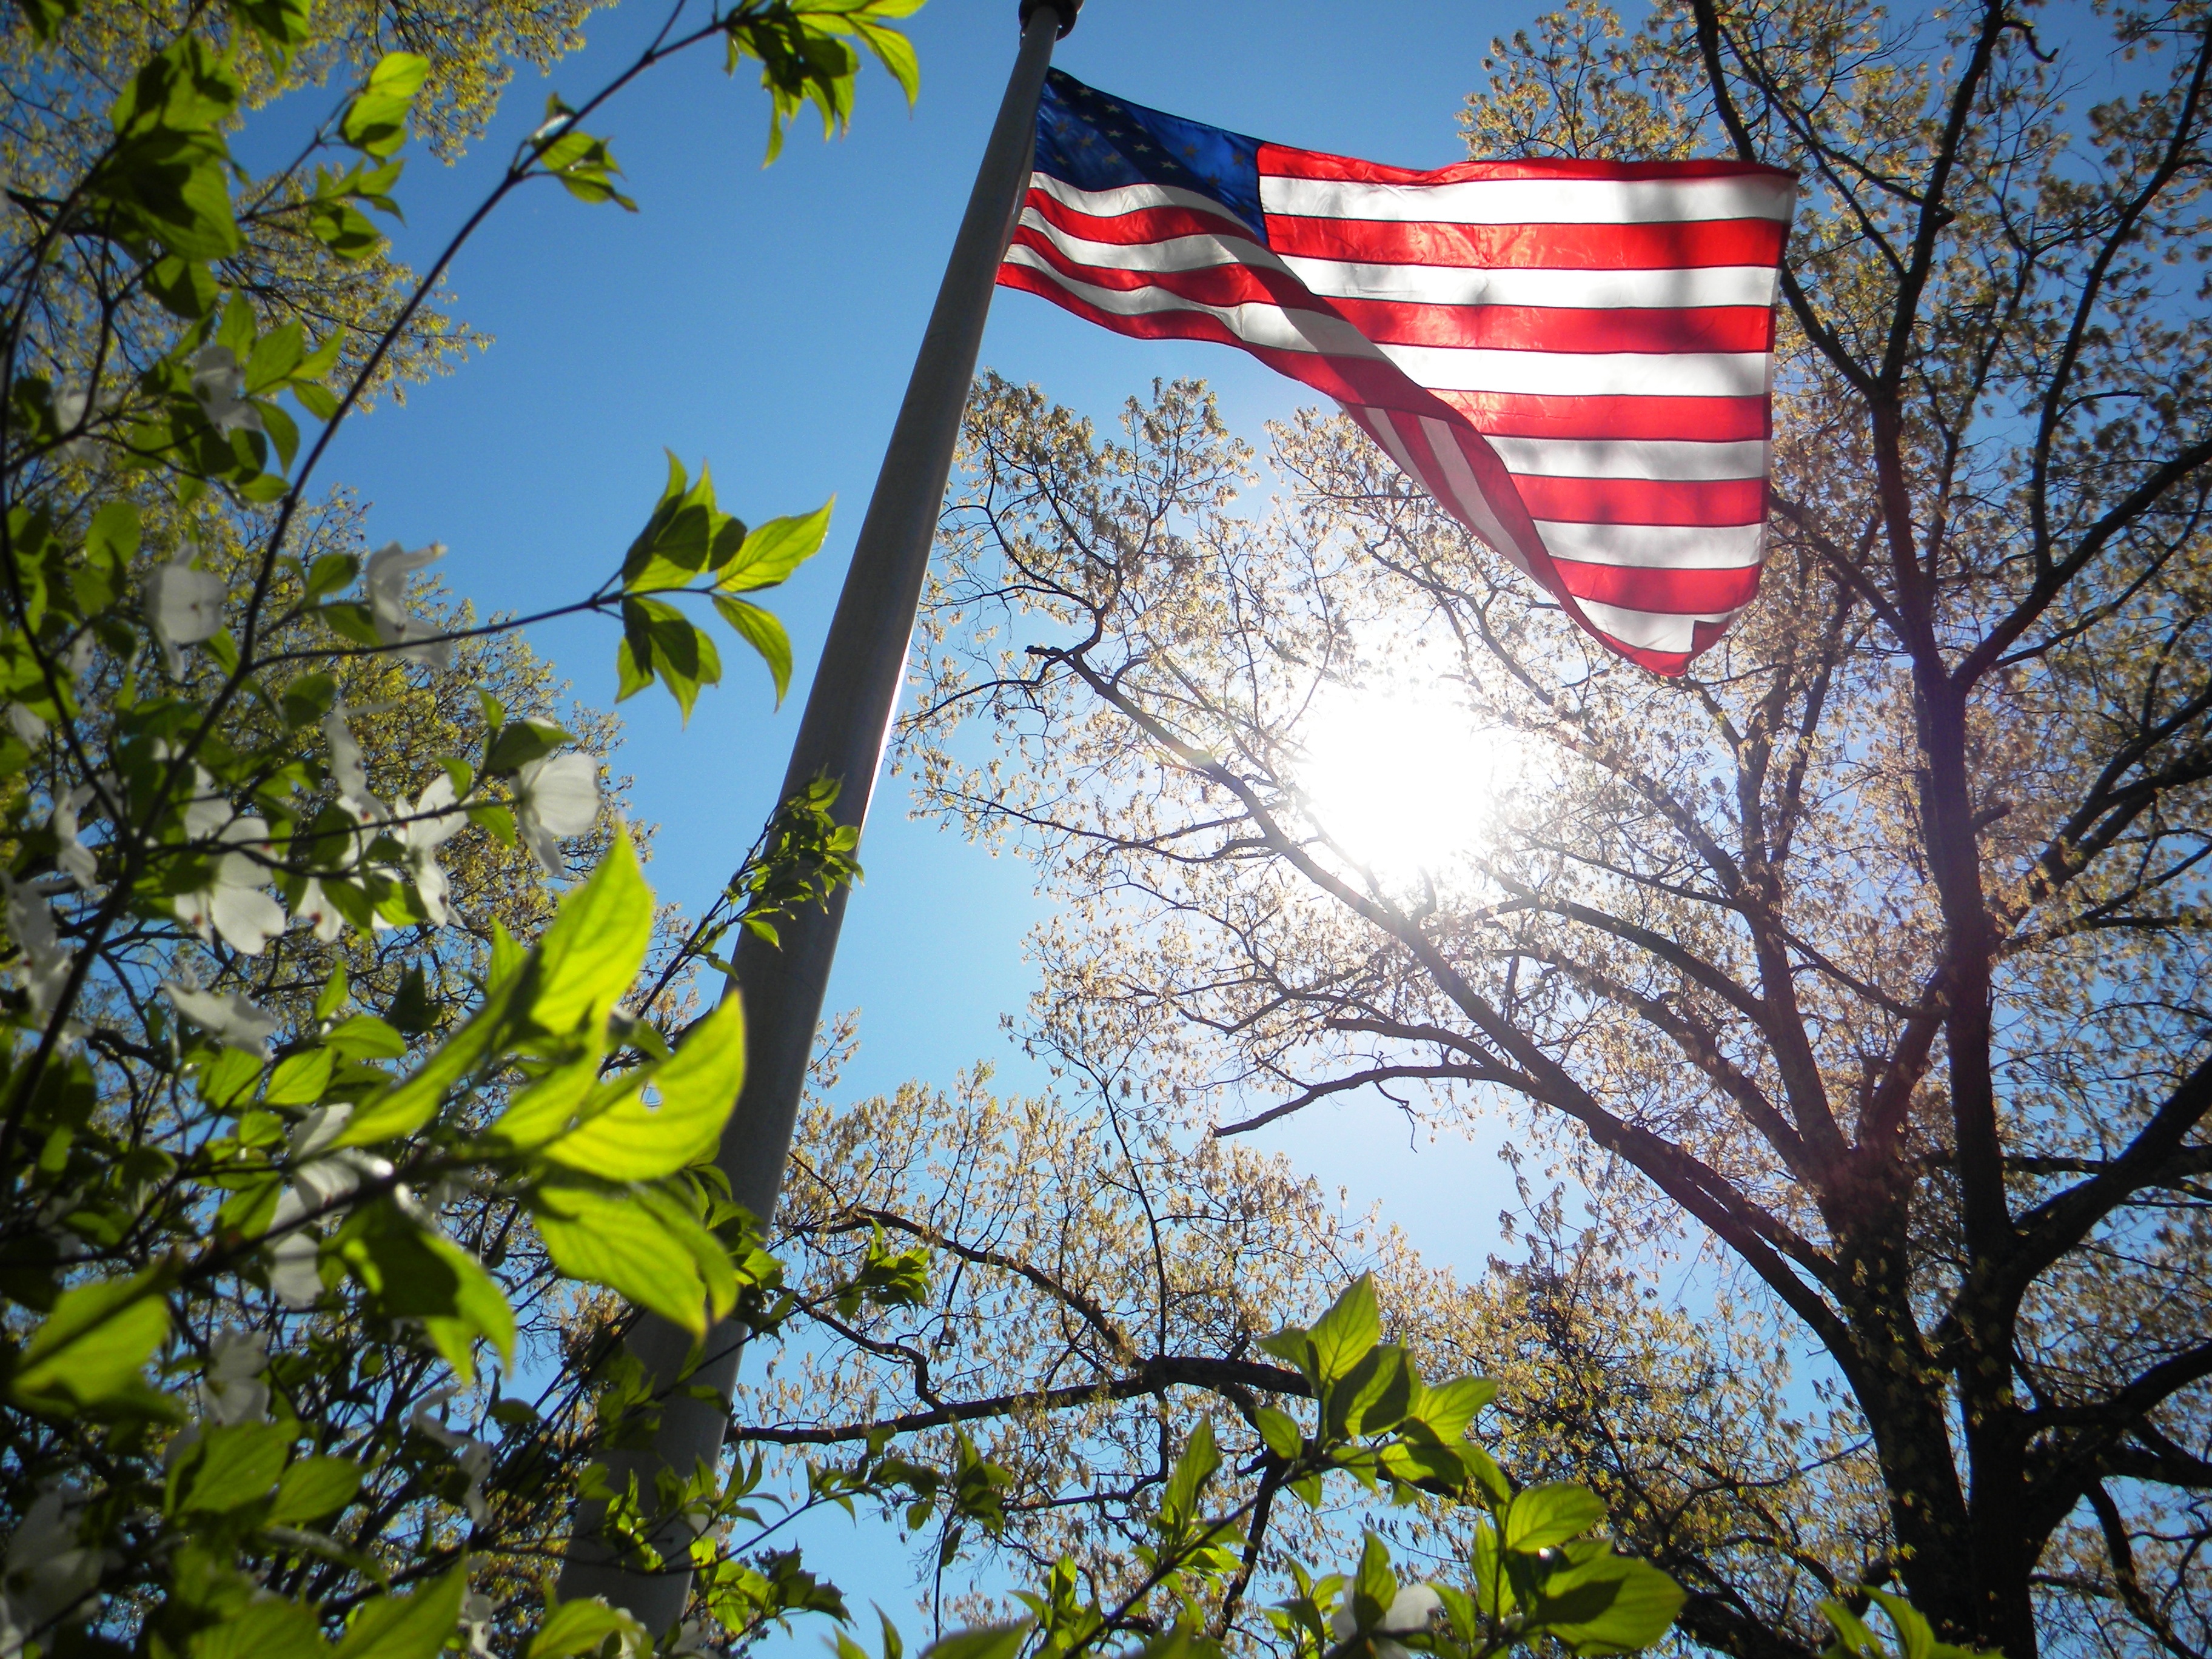 American Flag on a flag pole with trees in foreground and the sun shining through the branches